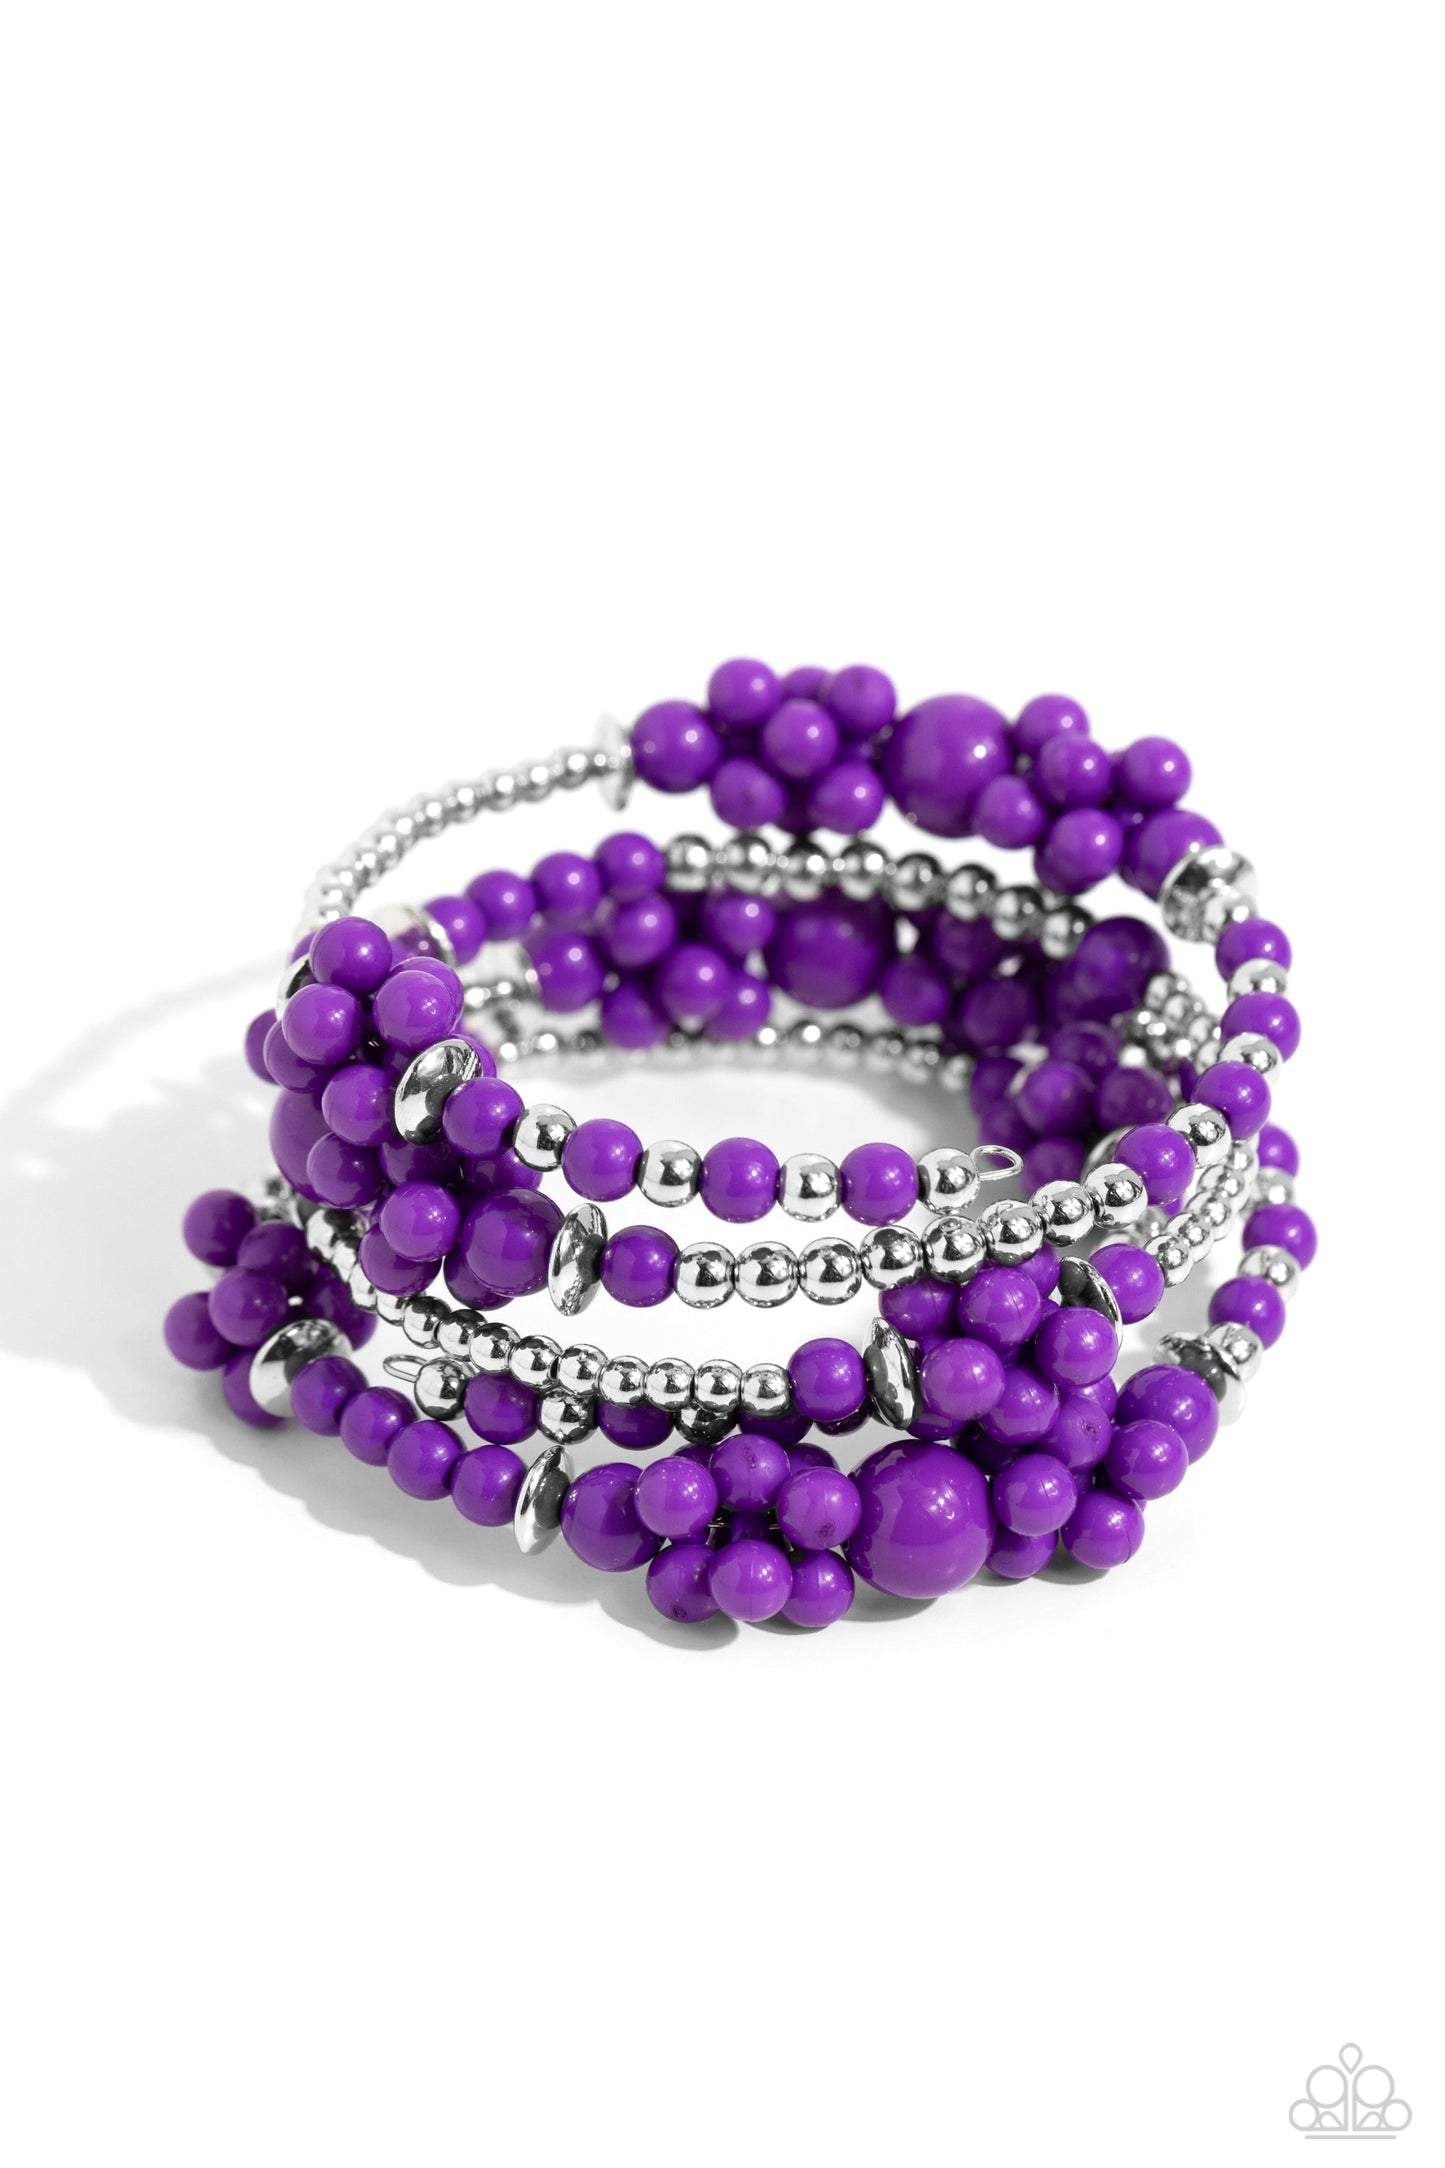 Compelling Clouds - Purple Infinity Wrap Bracelet - Paparazzi Accessories - Strands of sleek silver beads and accents mixed with plum acrylic beads in varying sizes are threaded along an infinity wrap-style bracelet. Clusters of beads are sporadically infused along the design, creating cloud-like, ethereal layers around the wrist.